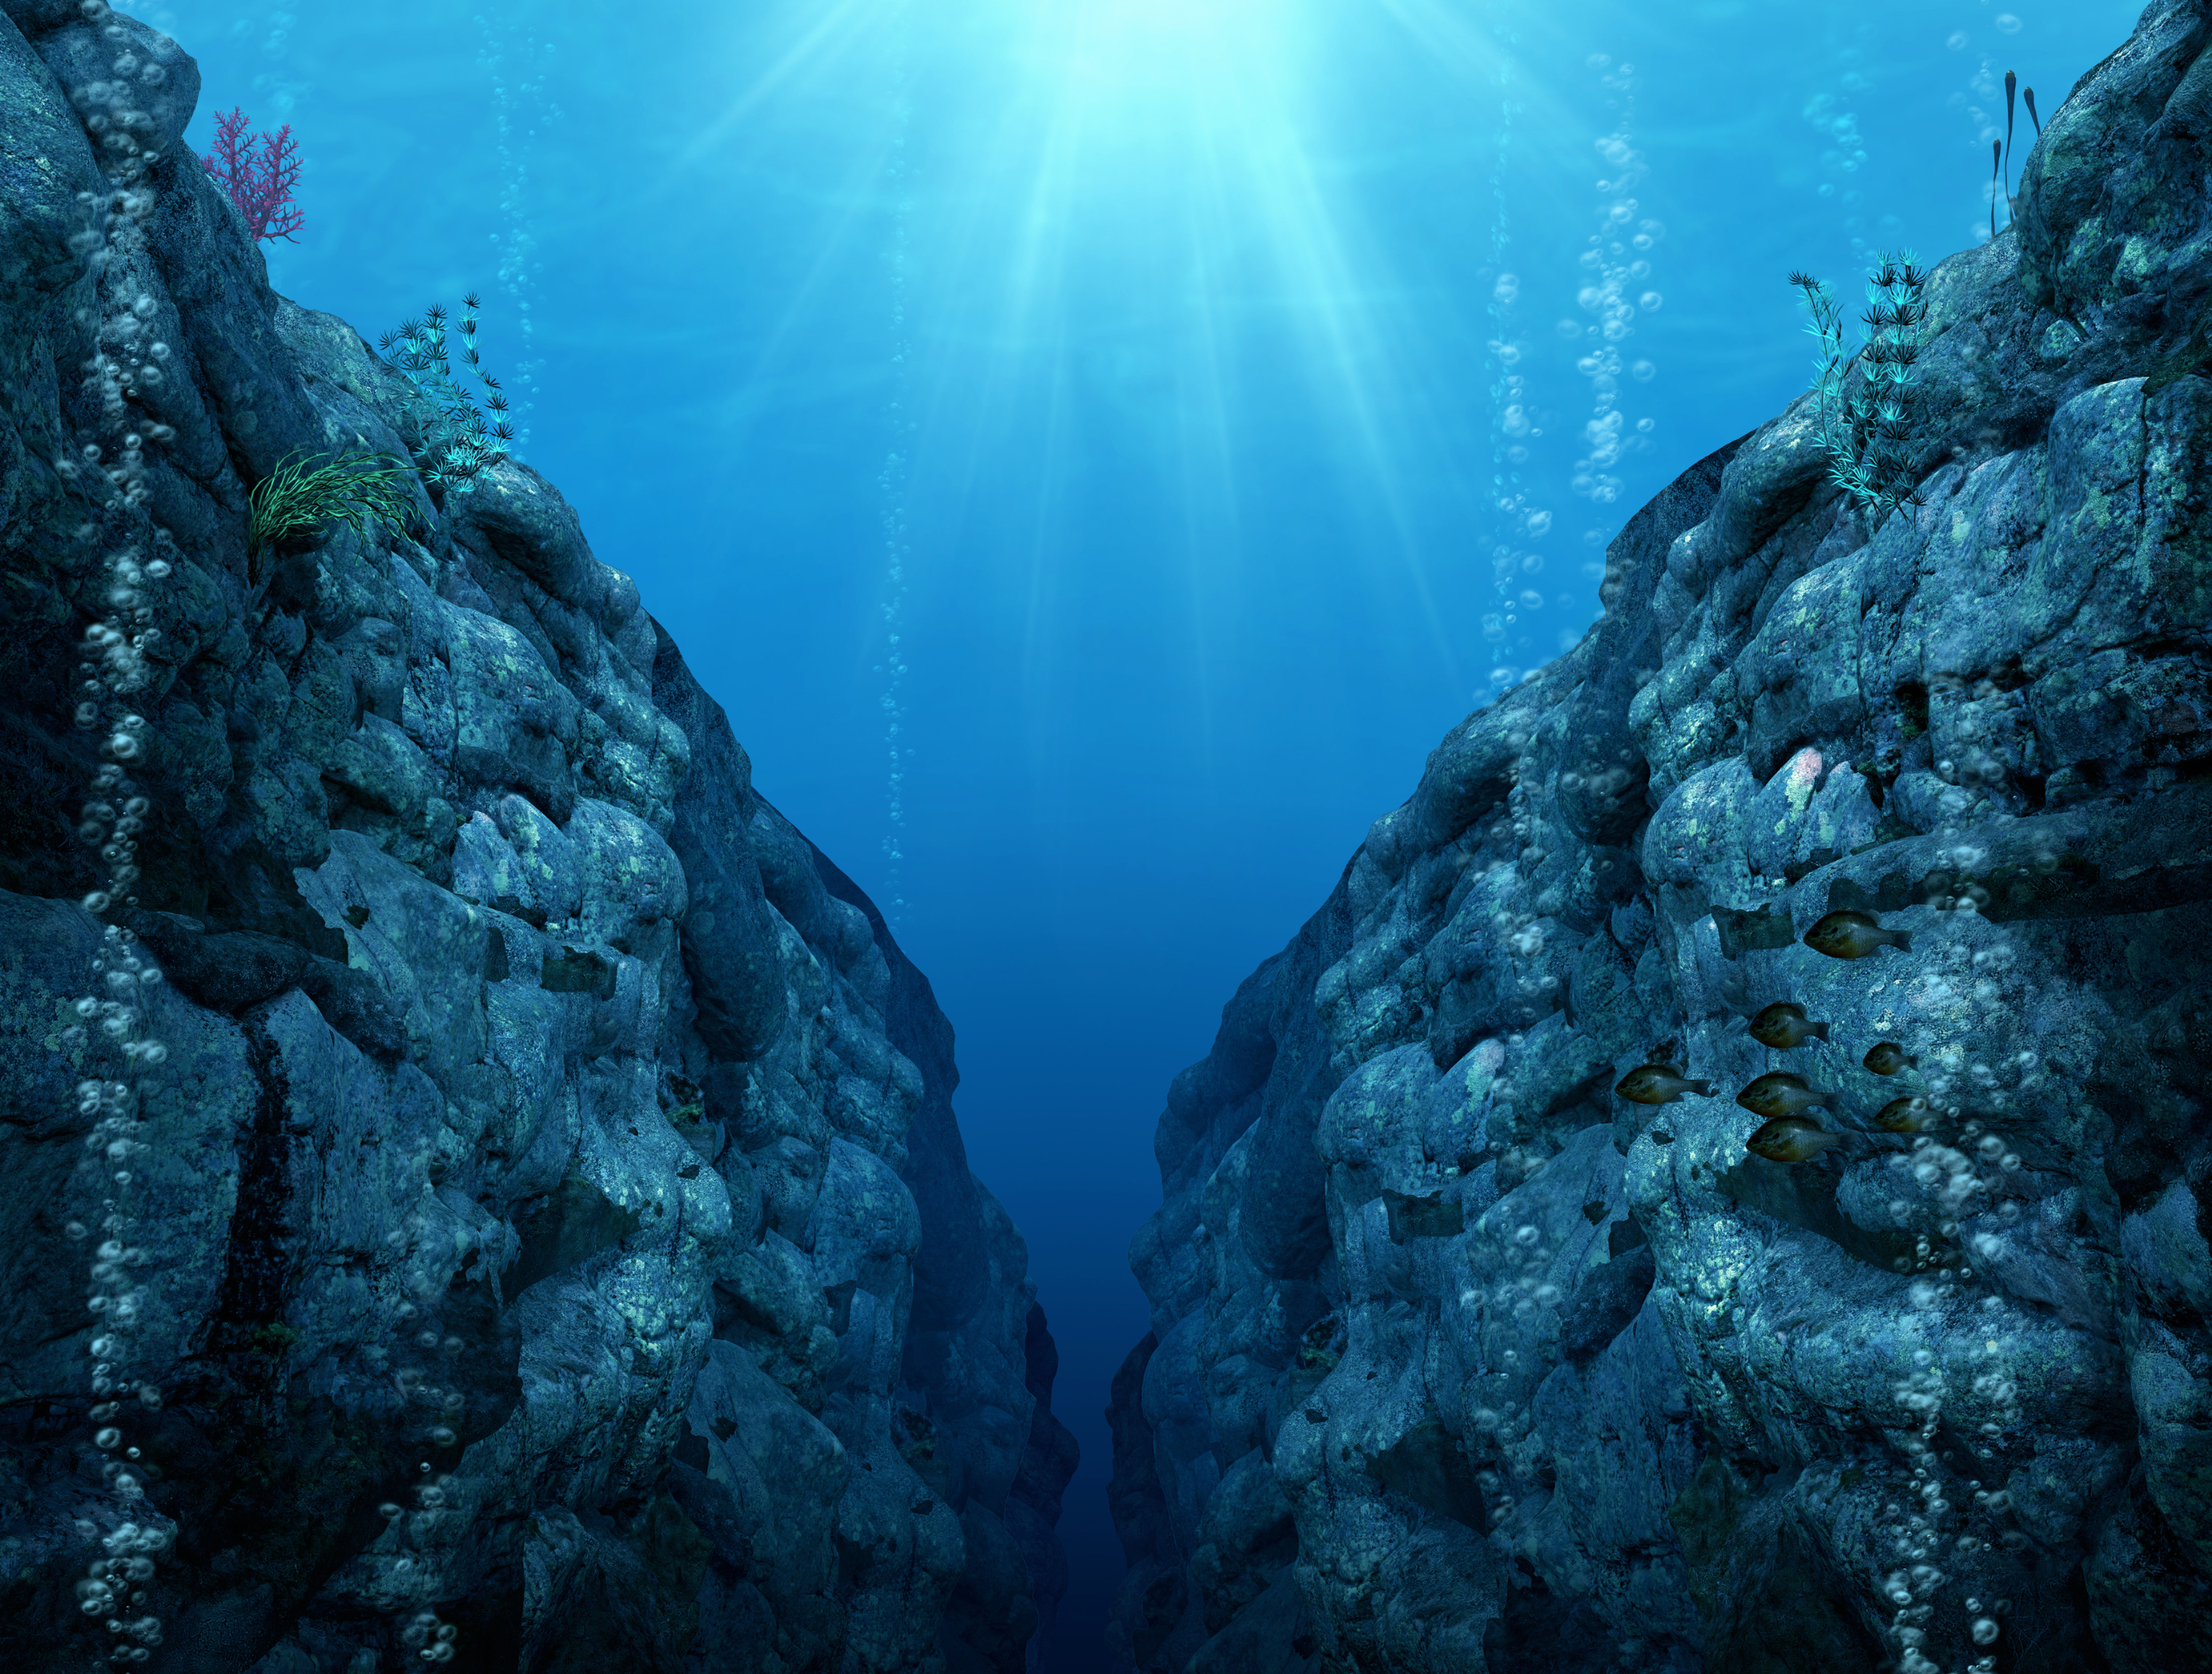 Underwater scene with sun rays shining between two rocky cliffs and small fish visible